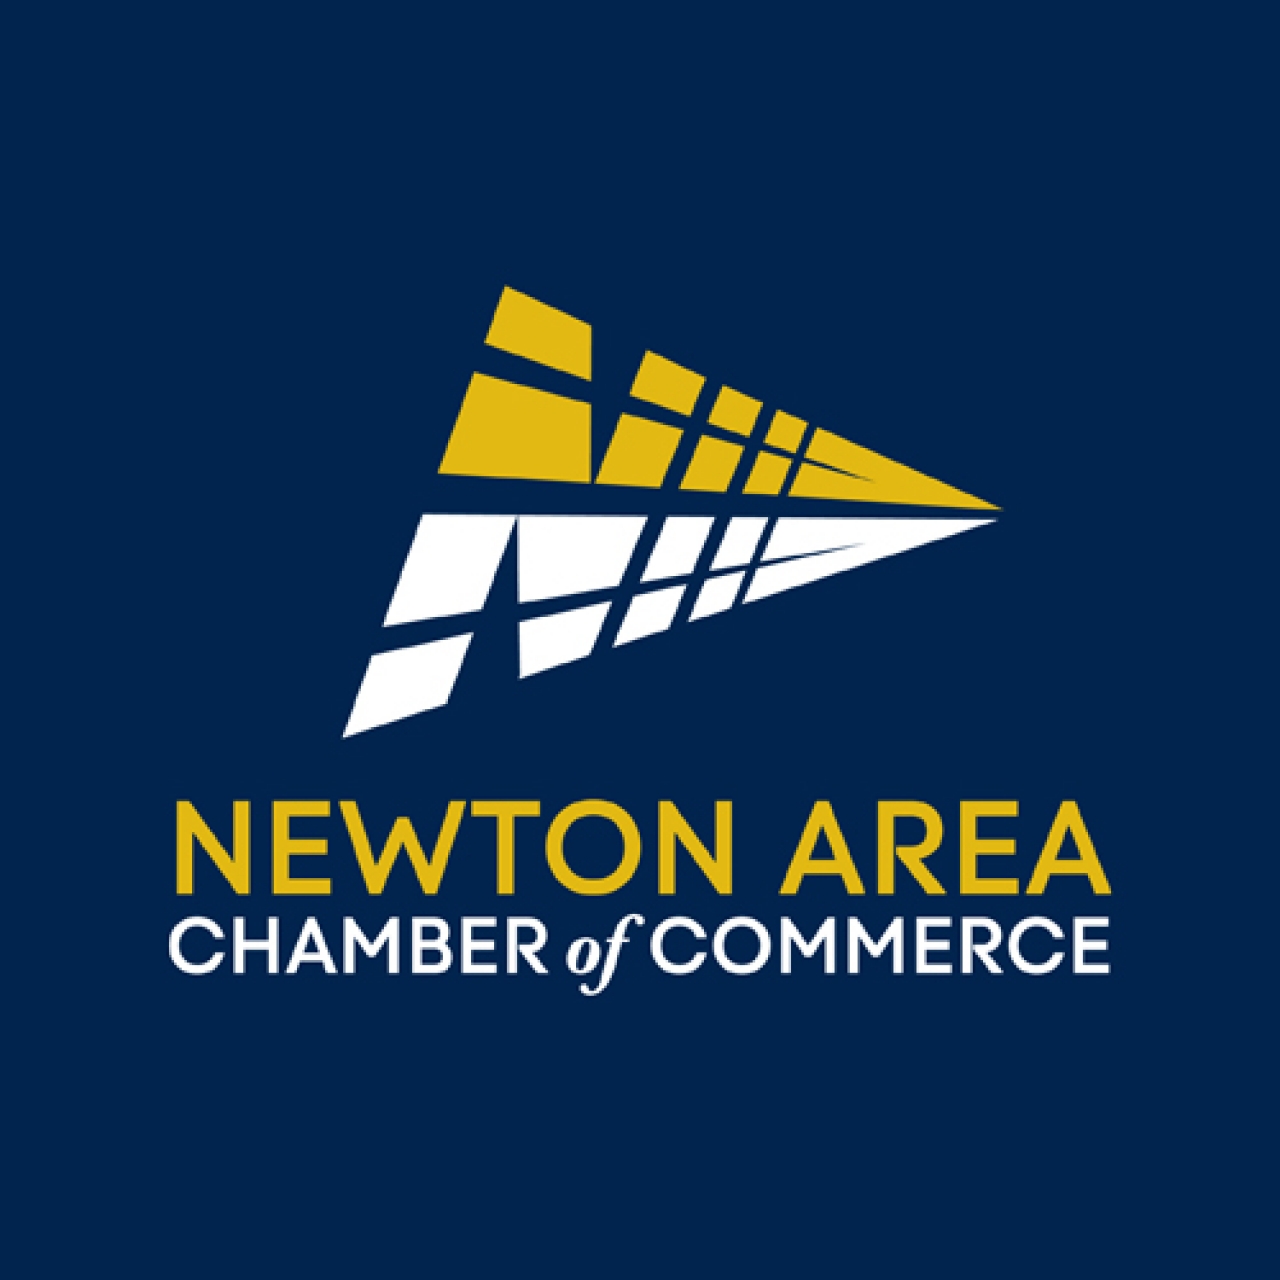 Newton Chamber of Commerce logo design the letter N and train tracks into the future